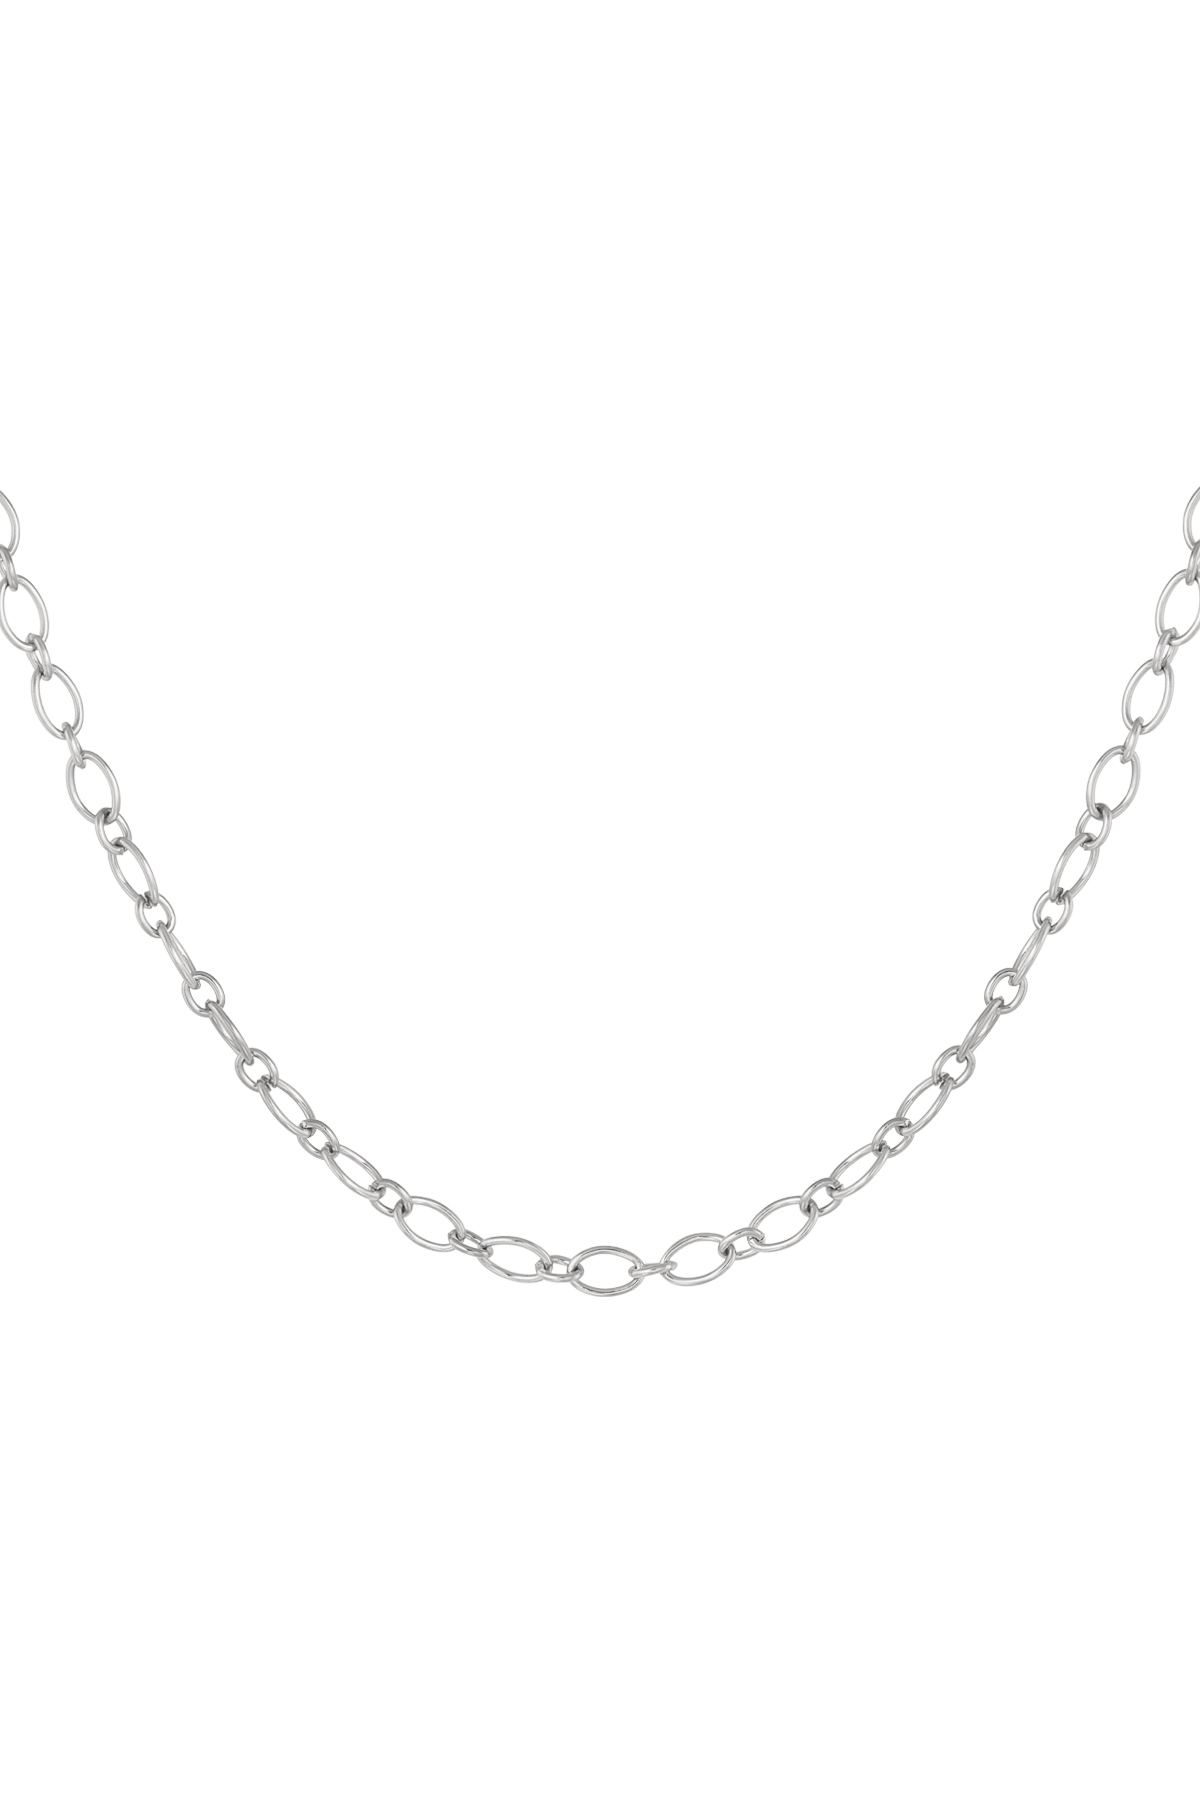 Link chain basic - silver